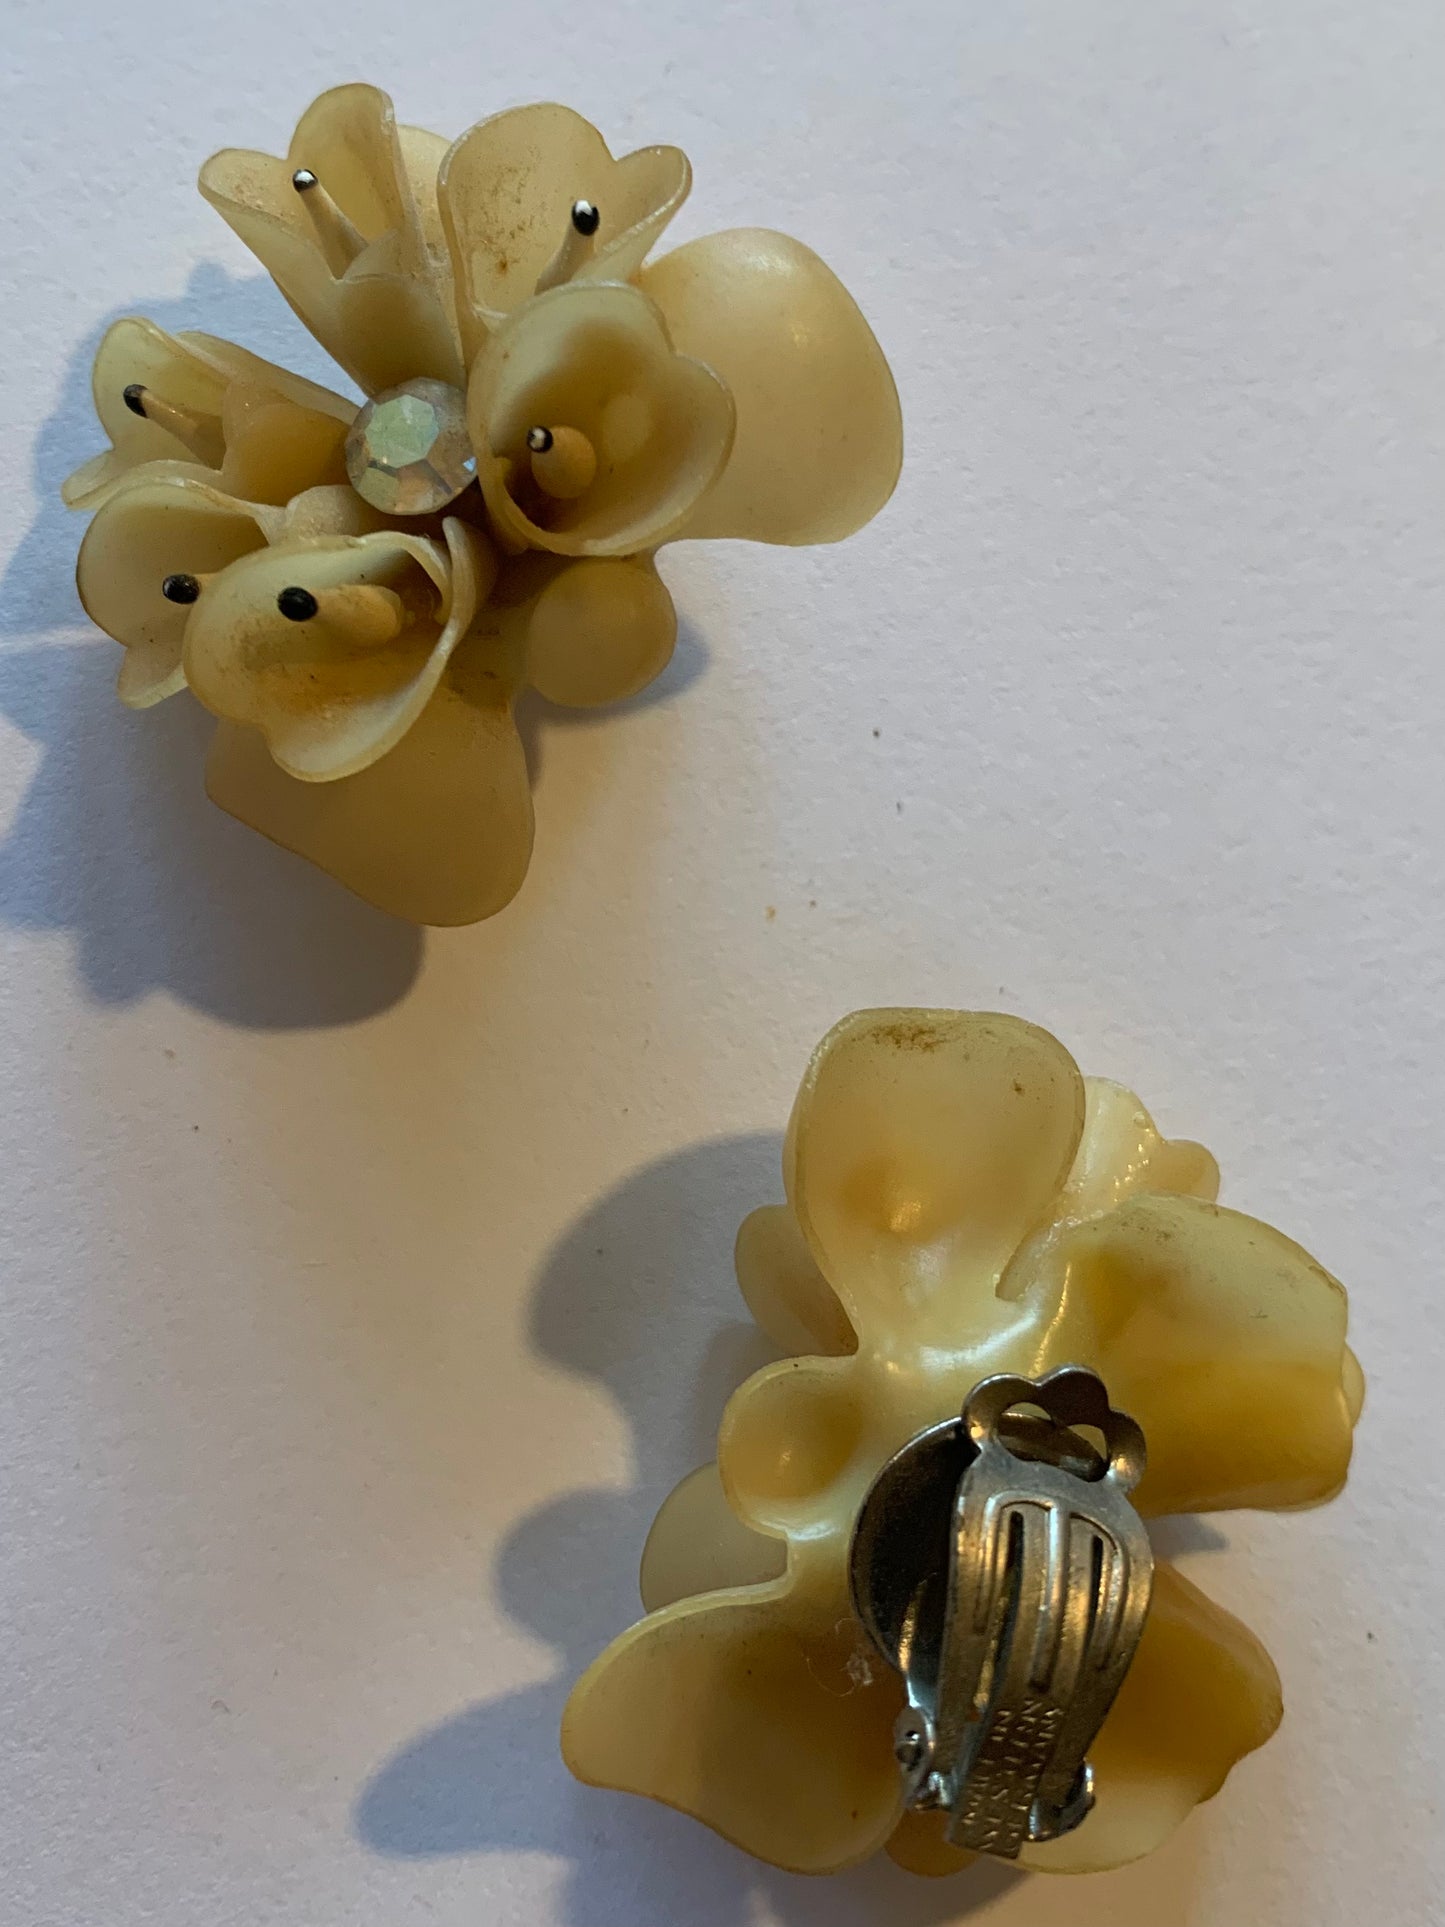 Tropical Ivory Colored Celluloid Flower Earrings with Rhinestones circa 1930s